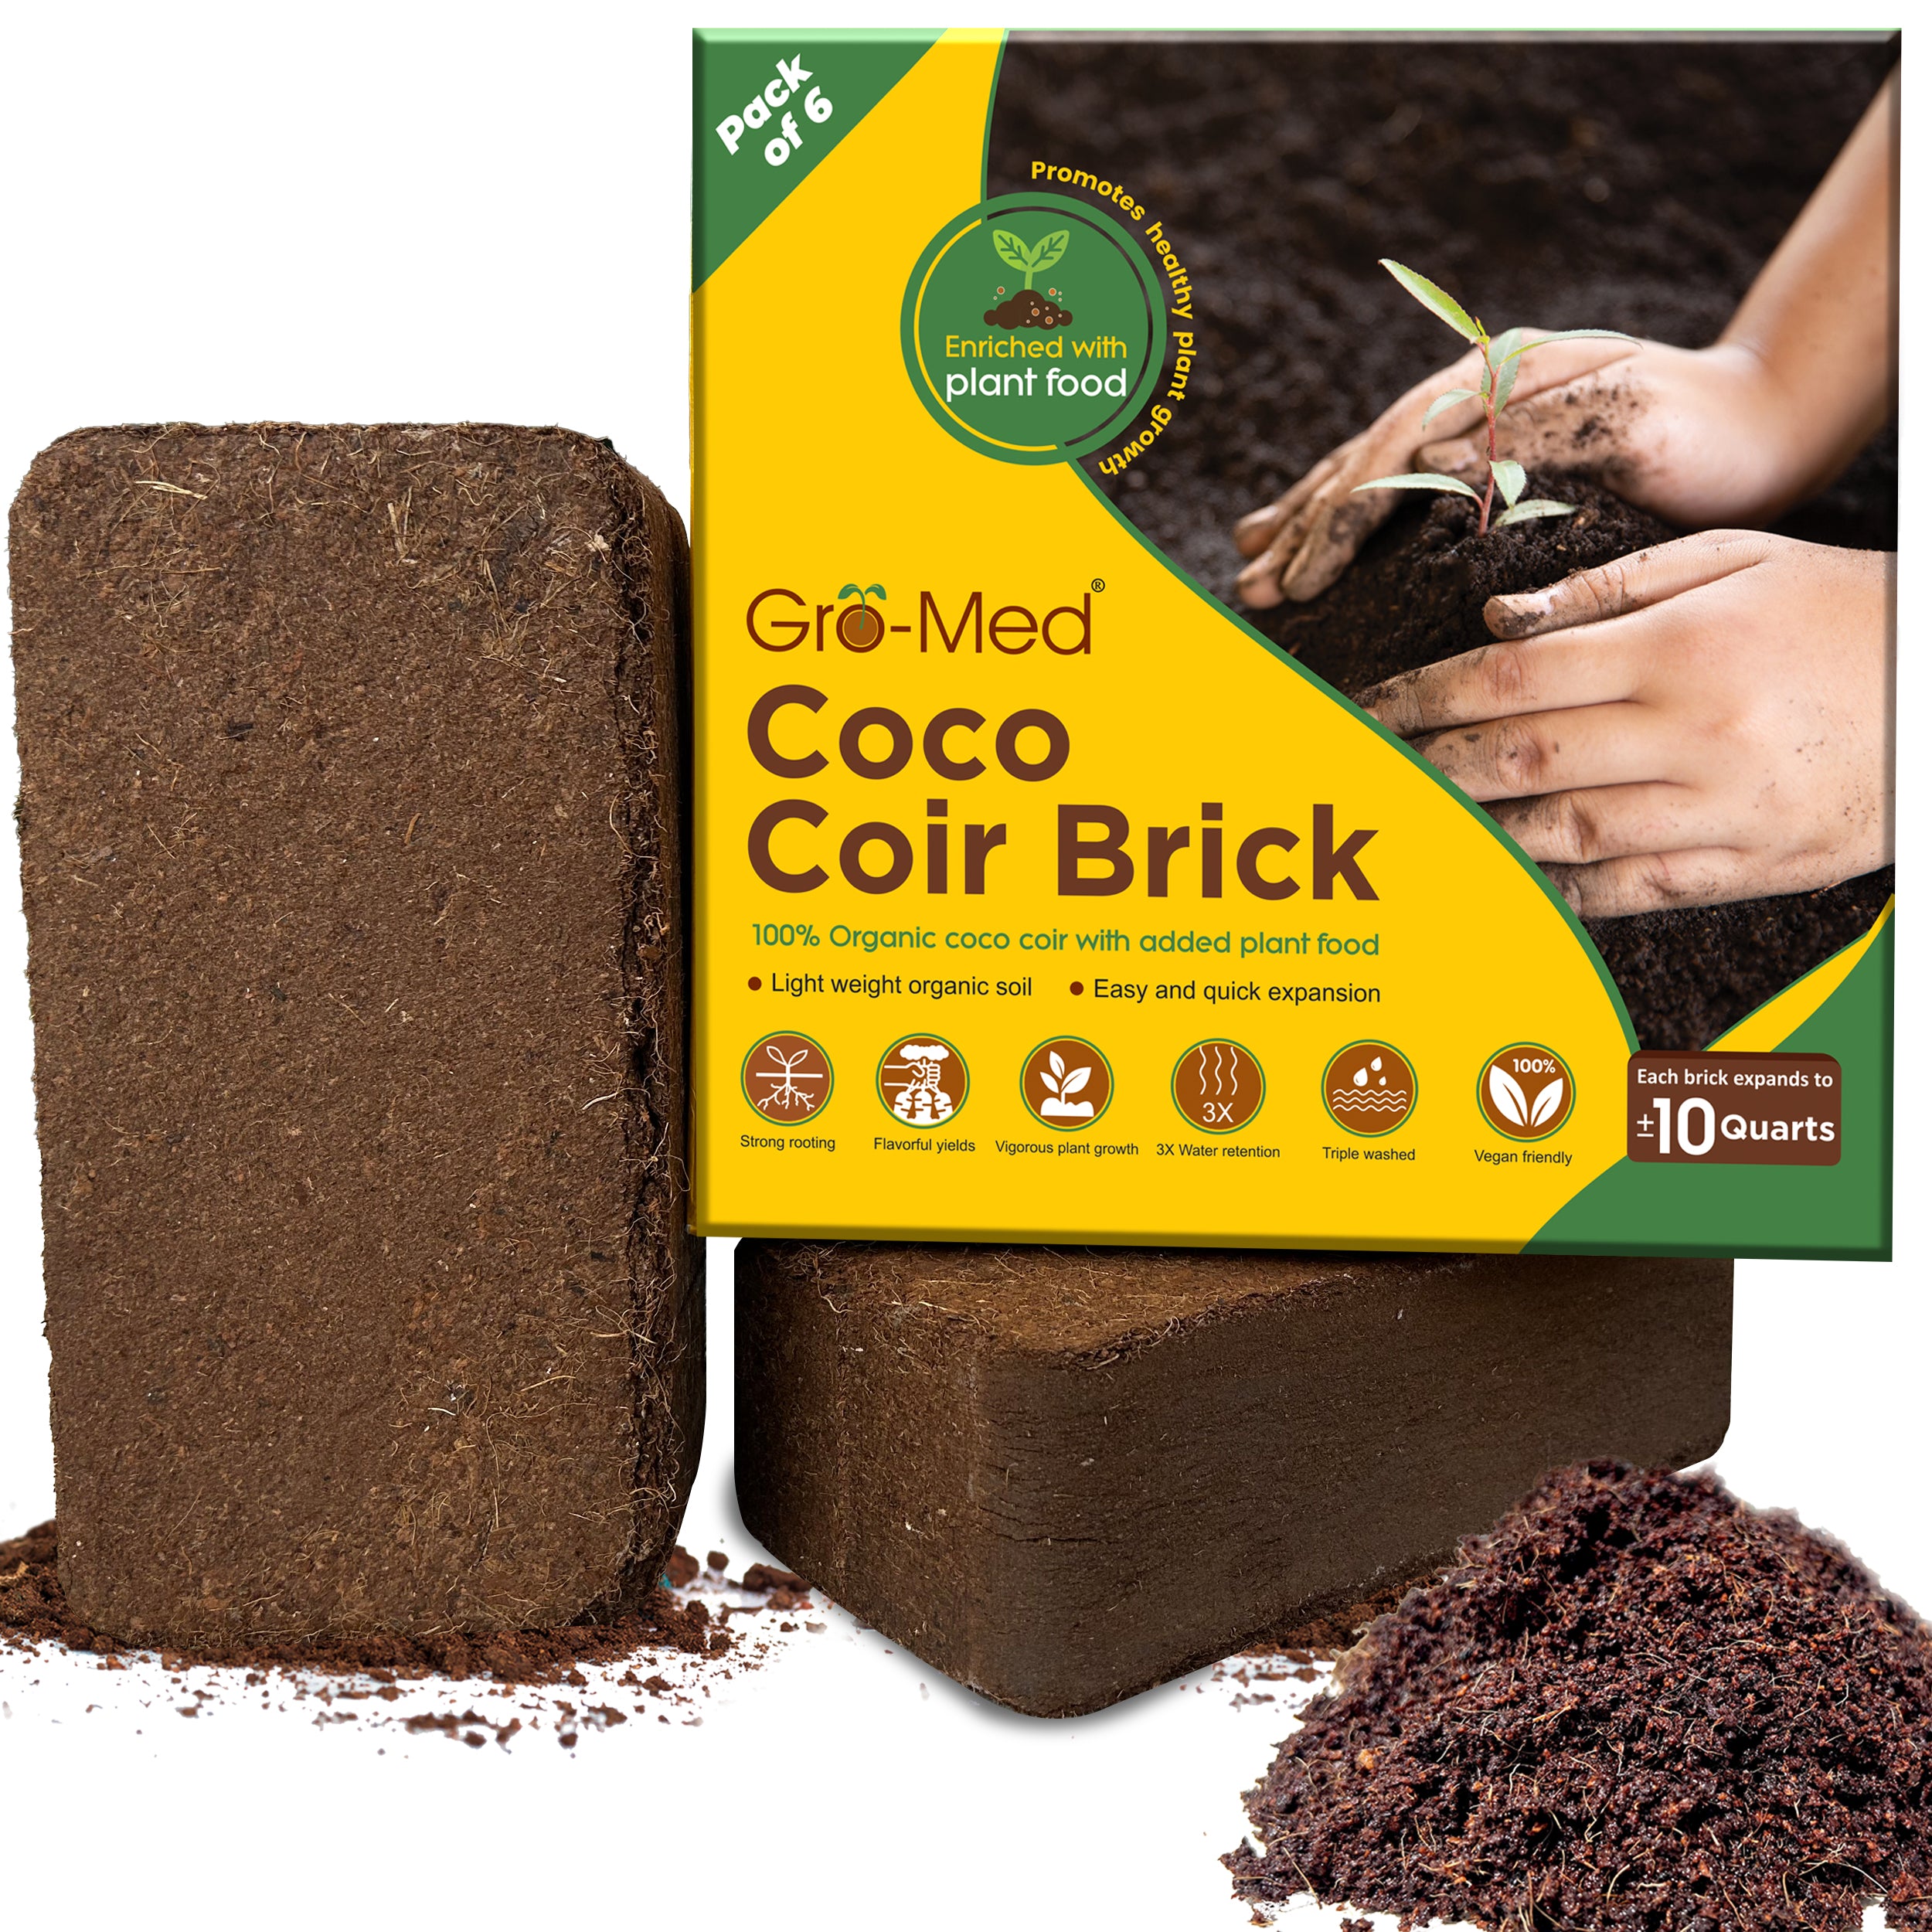 Coco Coir Brick Enriched with Plant Food Pack of 6 Expands to 60 Quarts